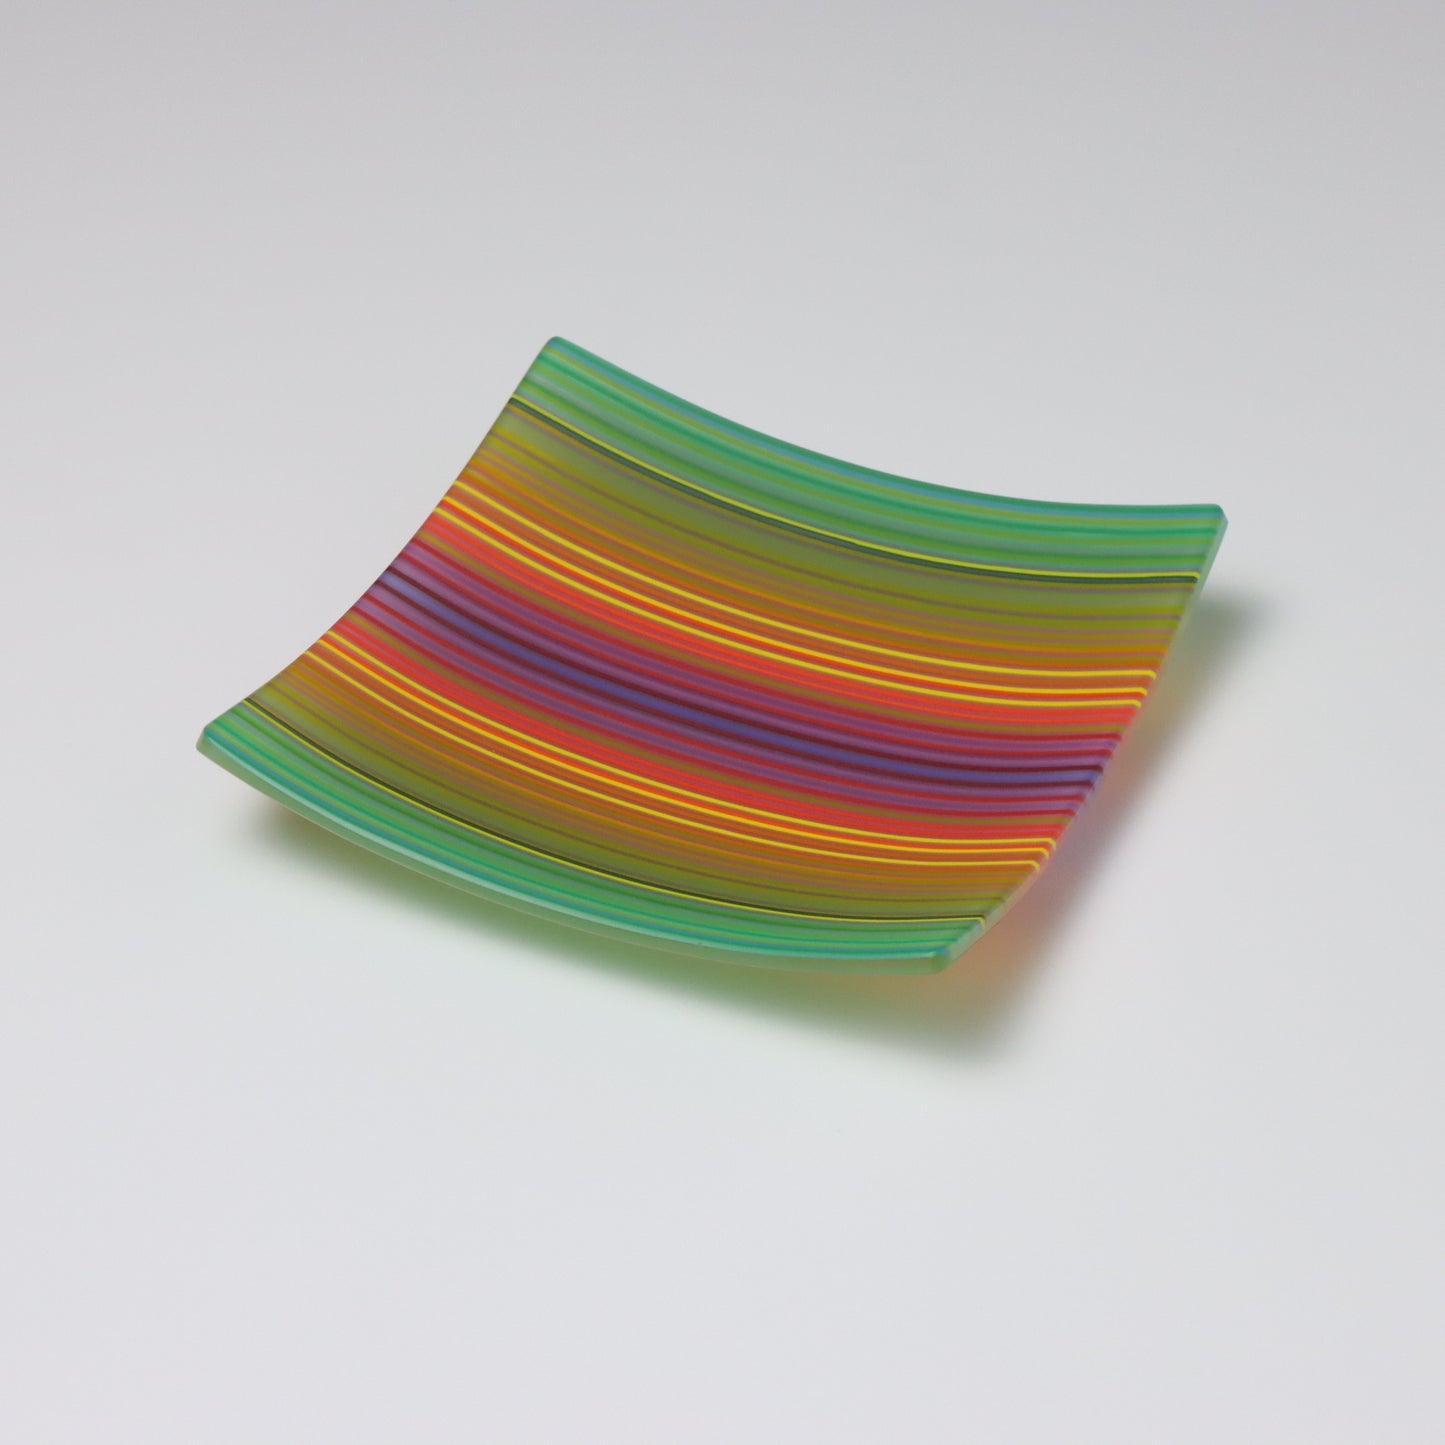 S3321 | Square Shaped ColourWave Glass Plate | Green, Orange, Pink and Purple